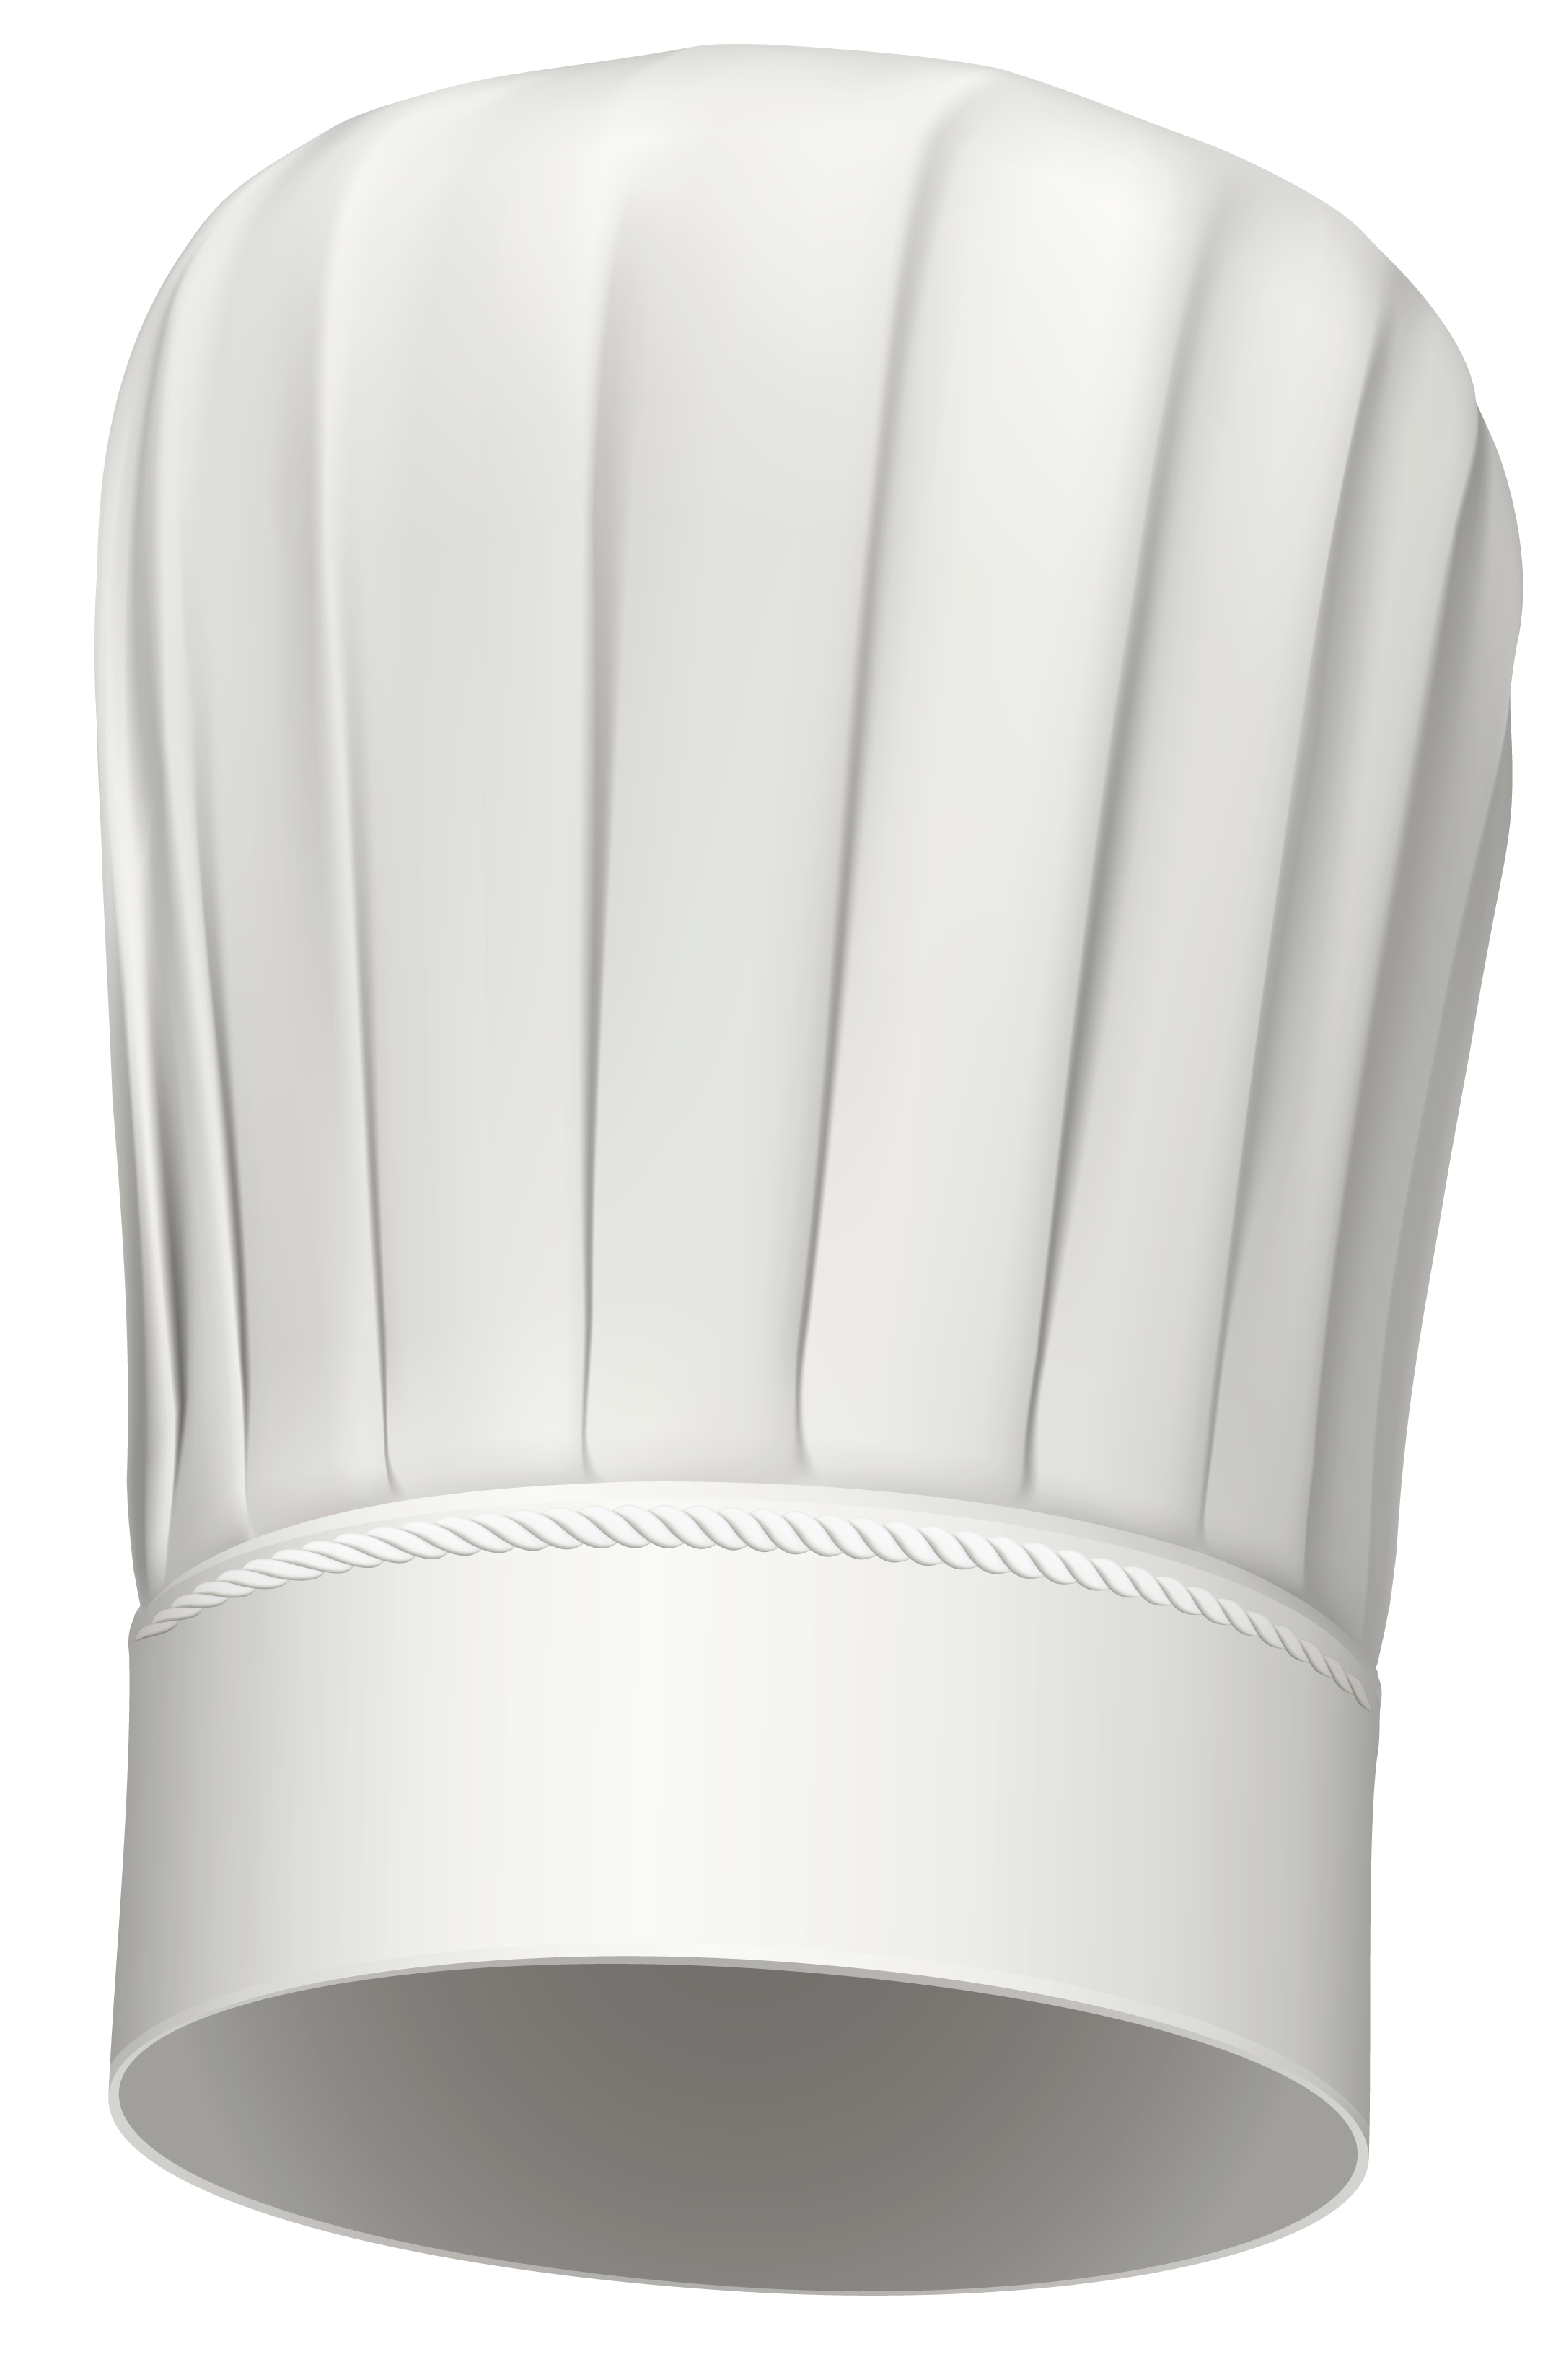 clipart of chef hat - photo #21